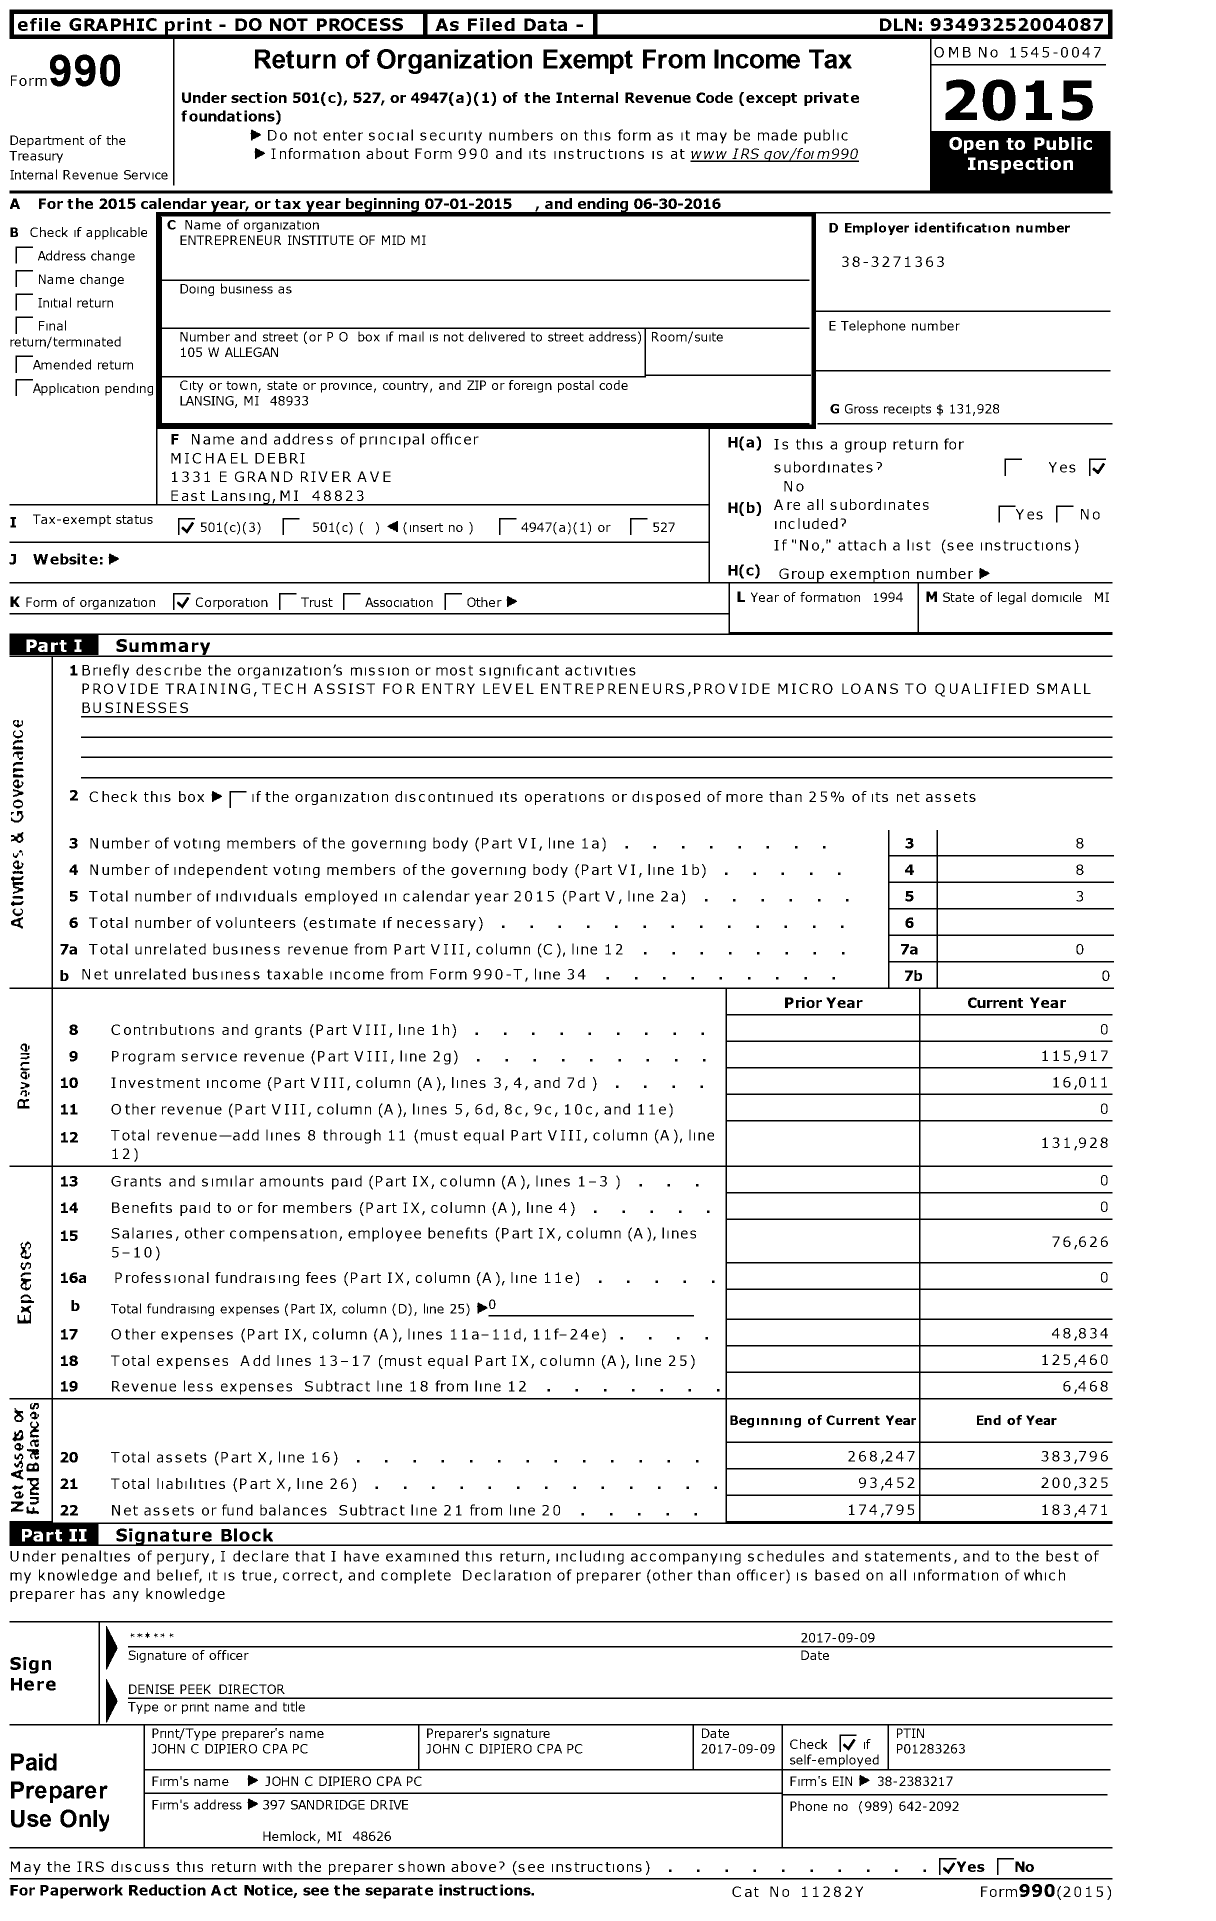 Image of first page of 2015 Form 990 for Entrepreneur Institute of Mid-Michigan